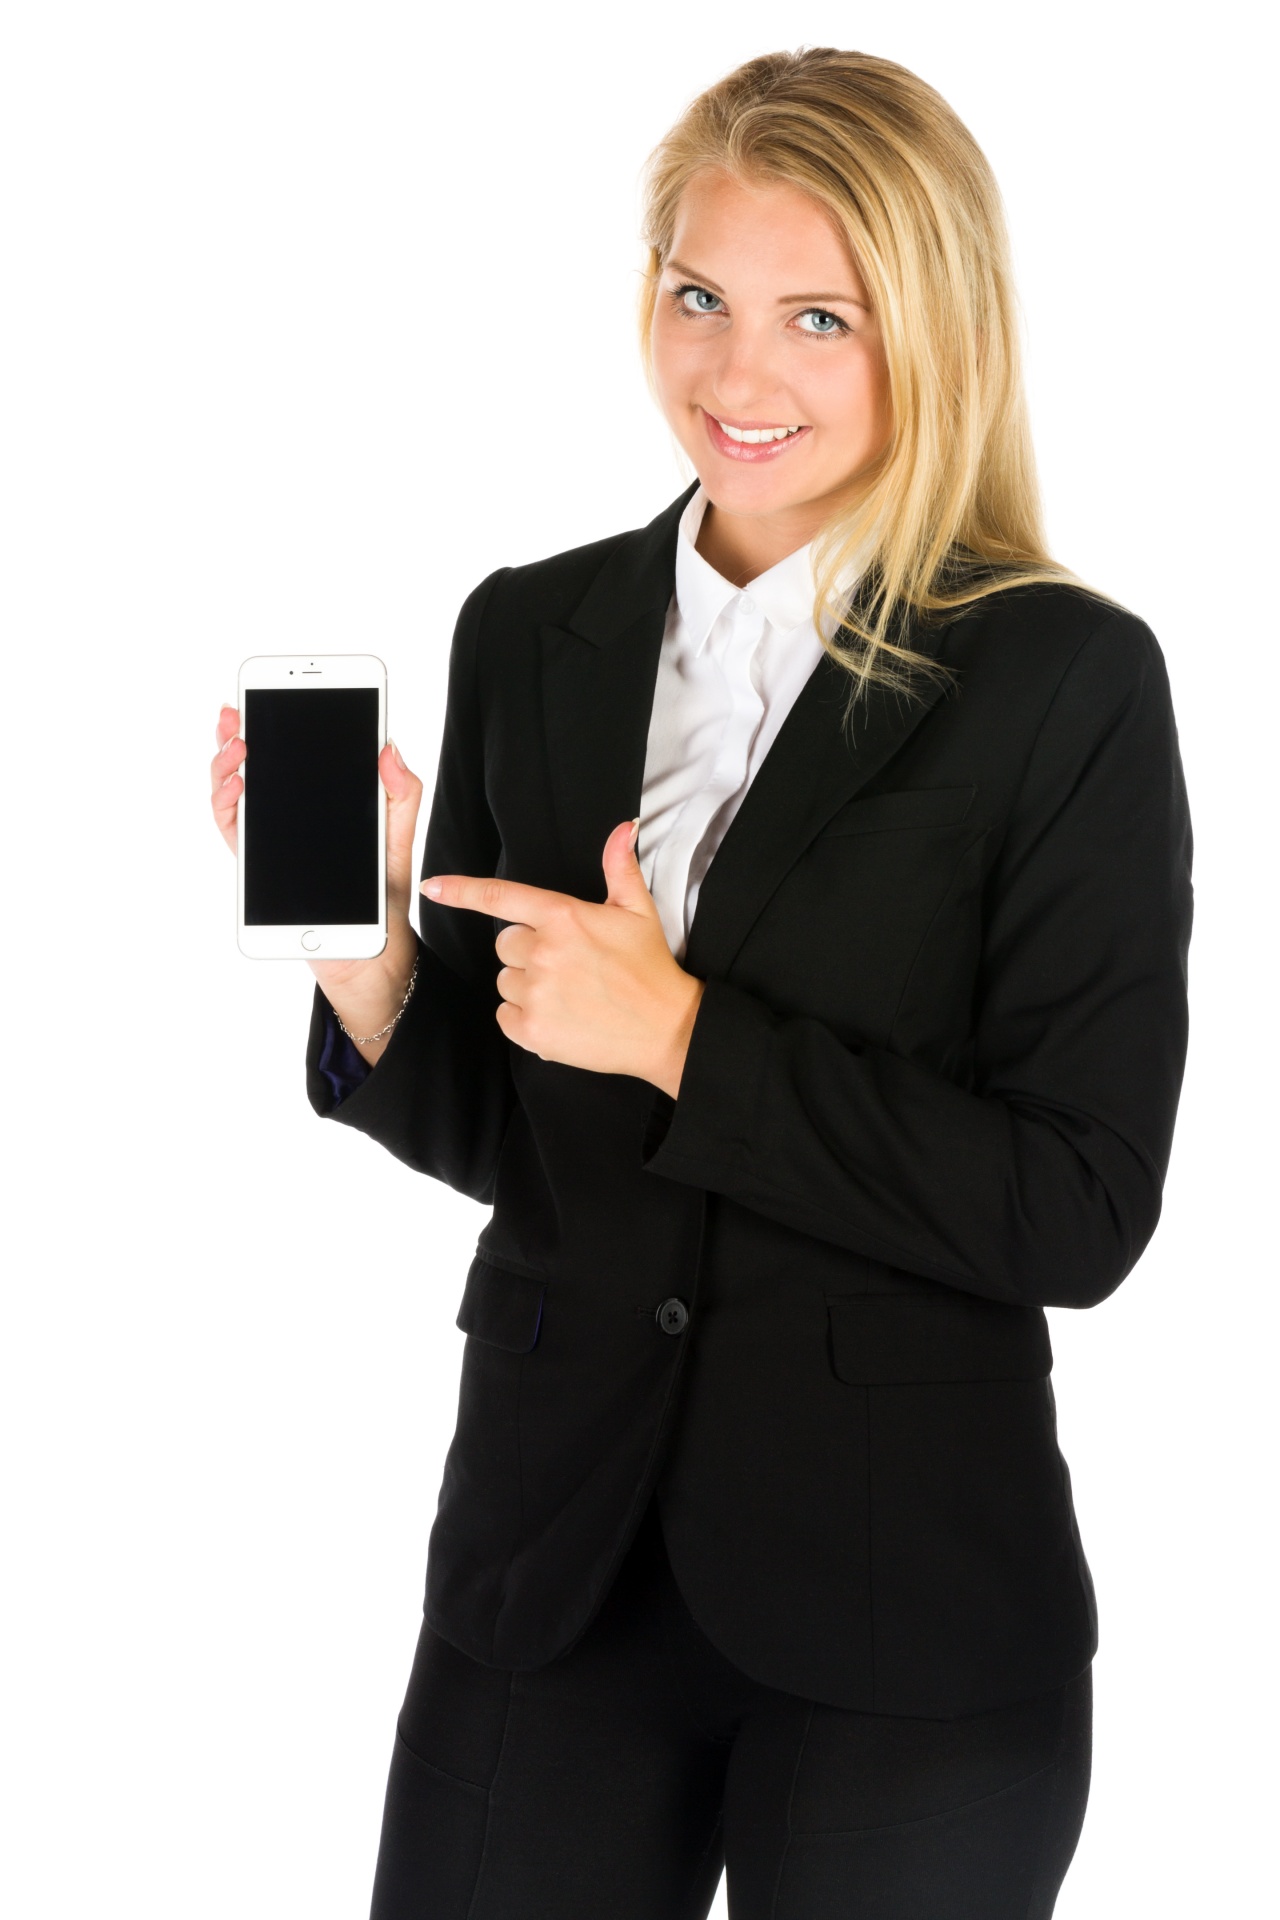 http://www.publicdomainpictures.net/pictures/190000/velka/business-woman-and-the-phone-1470385573lX8.jpg